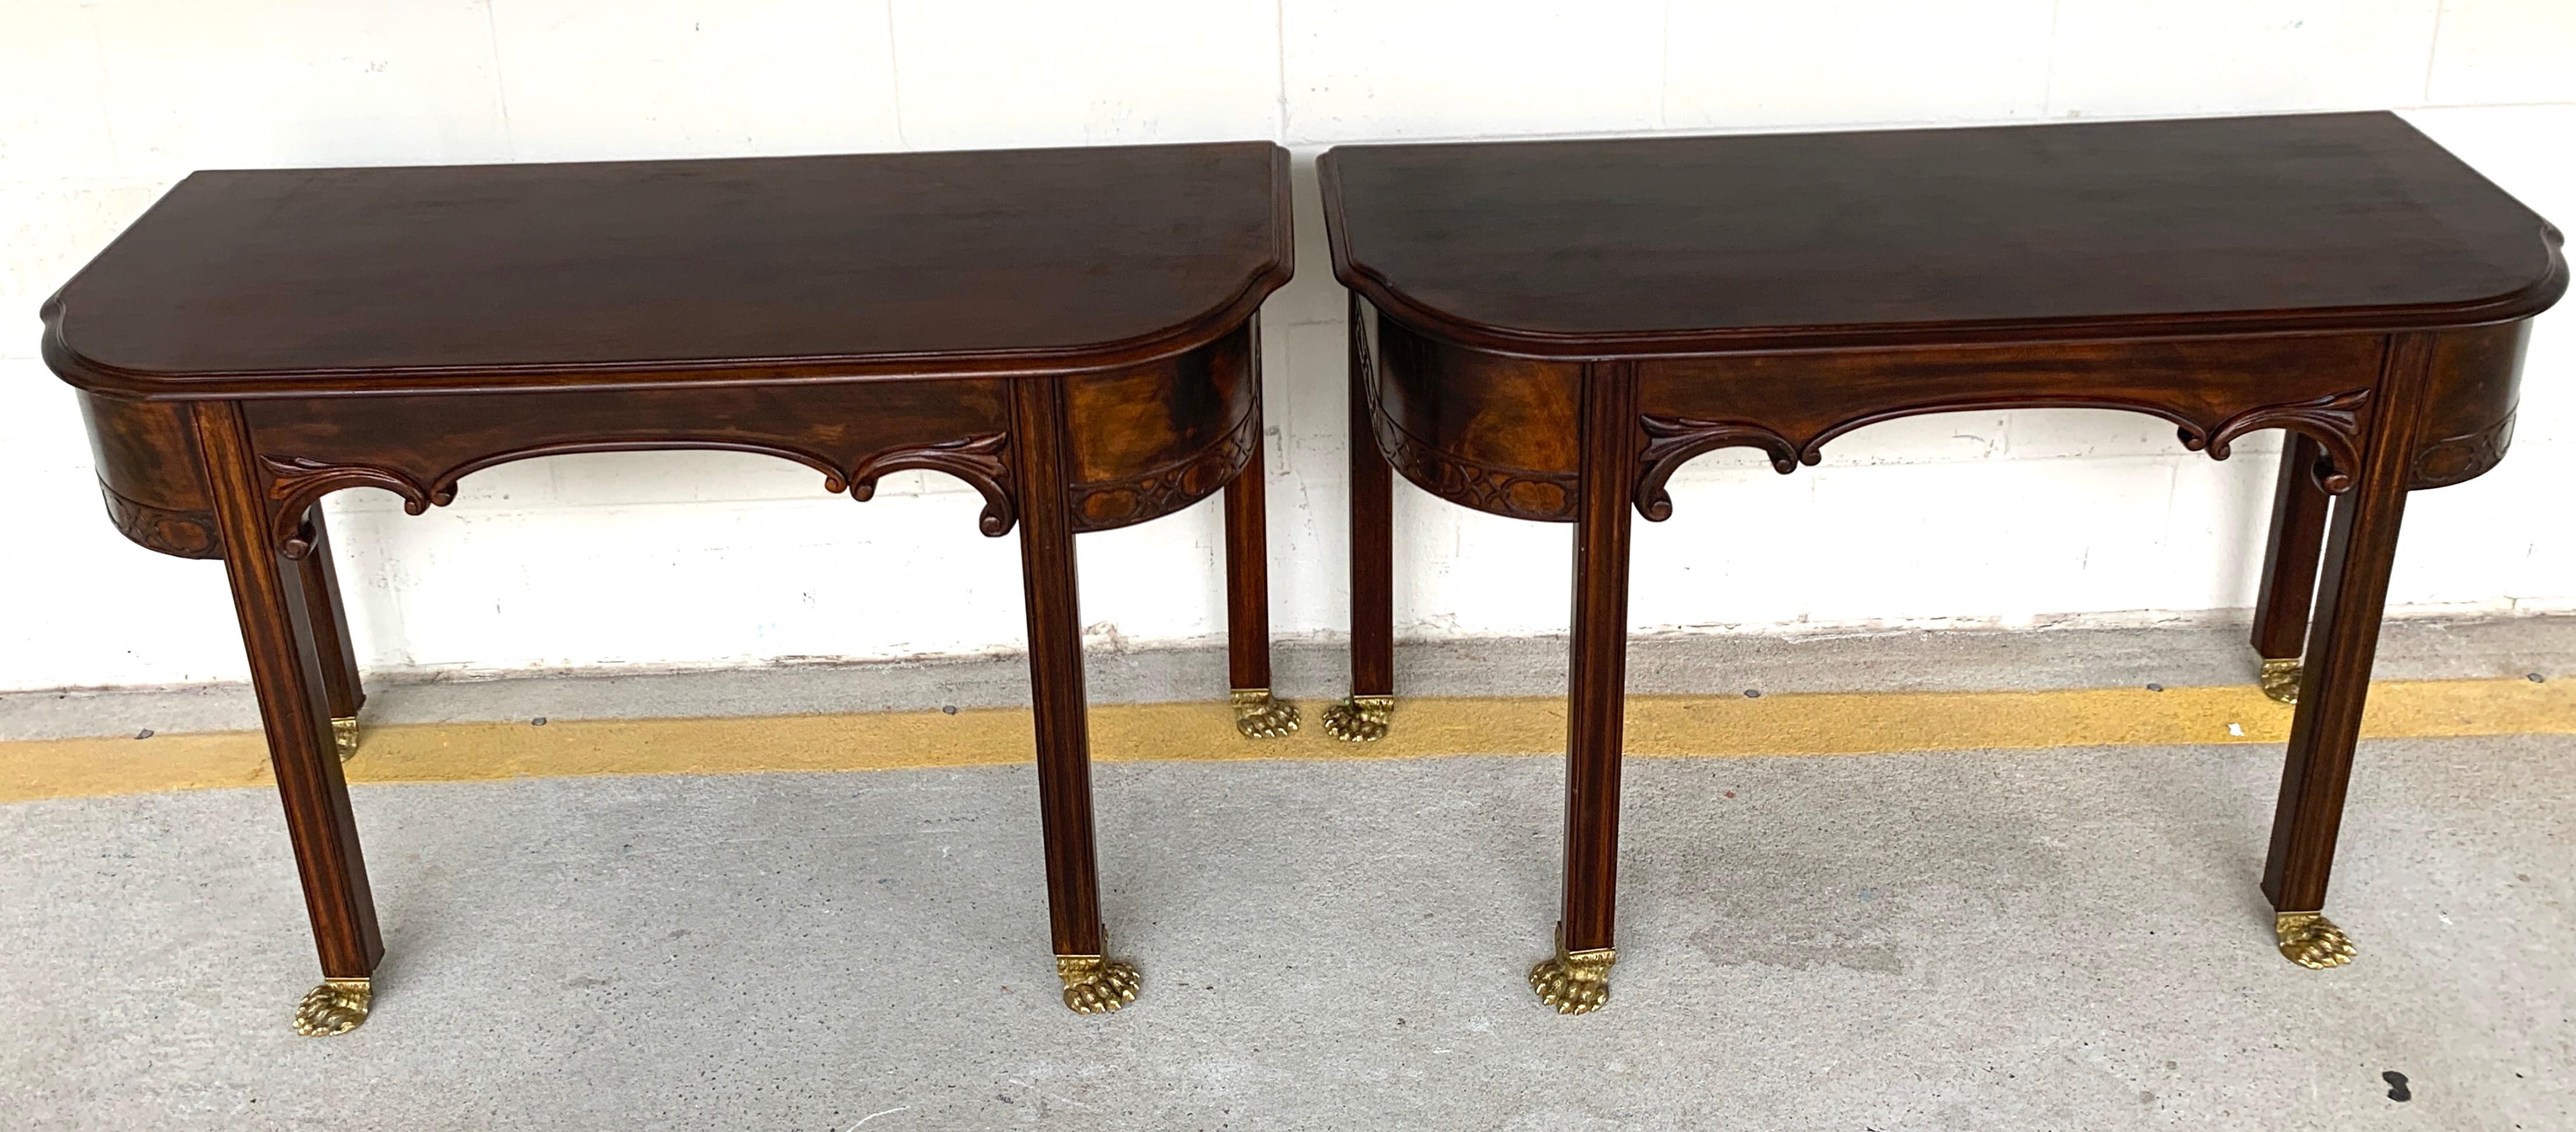 Pair of English Regency brass footed console tables, Each one of rectangular form, with scalloped front aprons, raised on four column legs with finely cast brass paw feet.
Each console is 44-Inches wide x 18-Inches deep x 26.5 -Inches high

pair